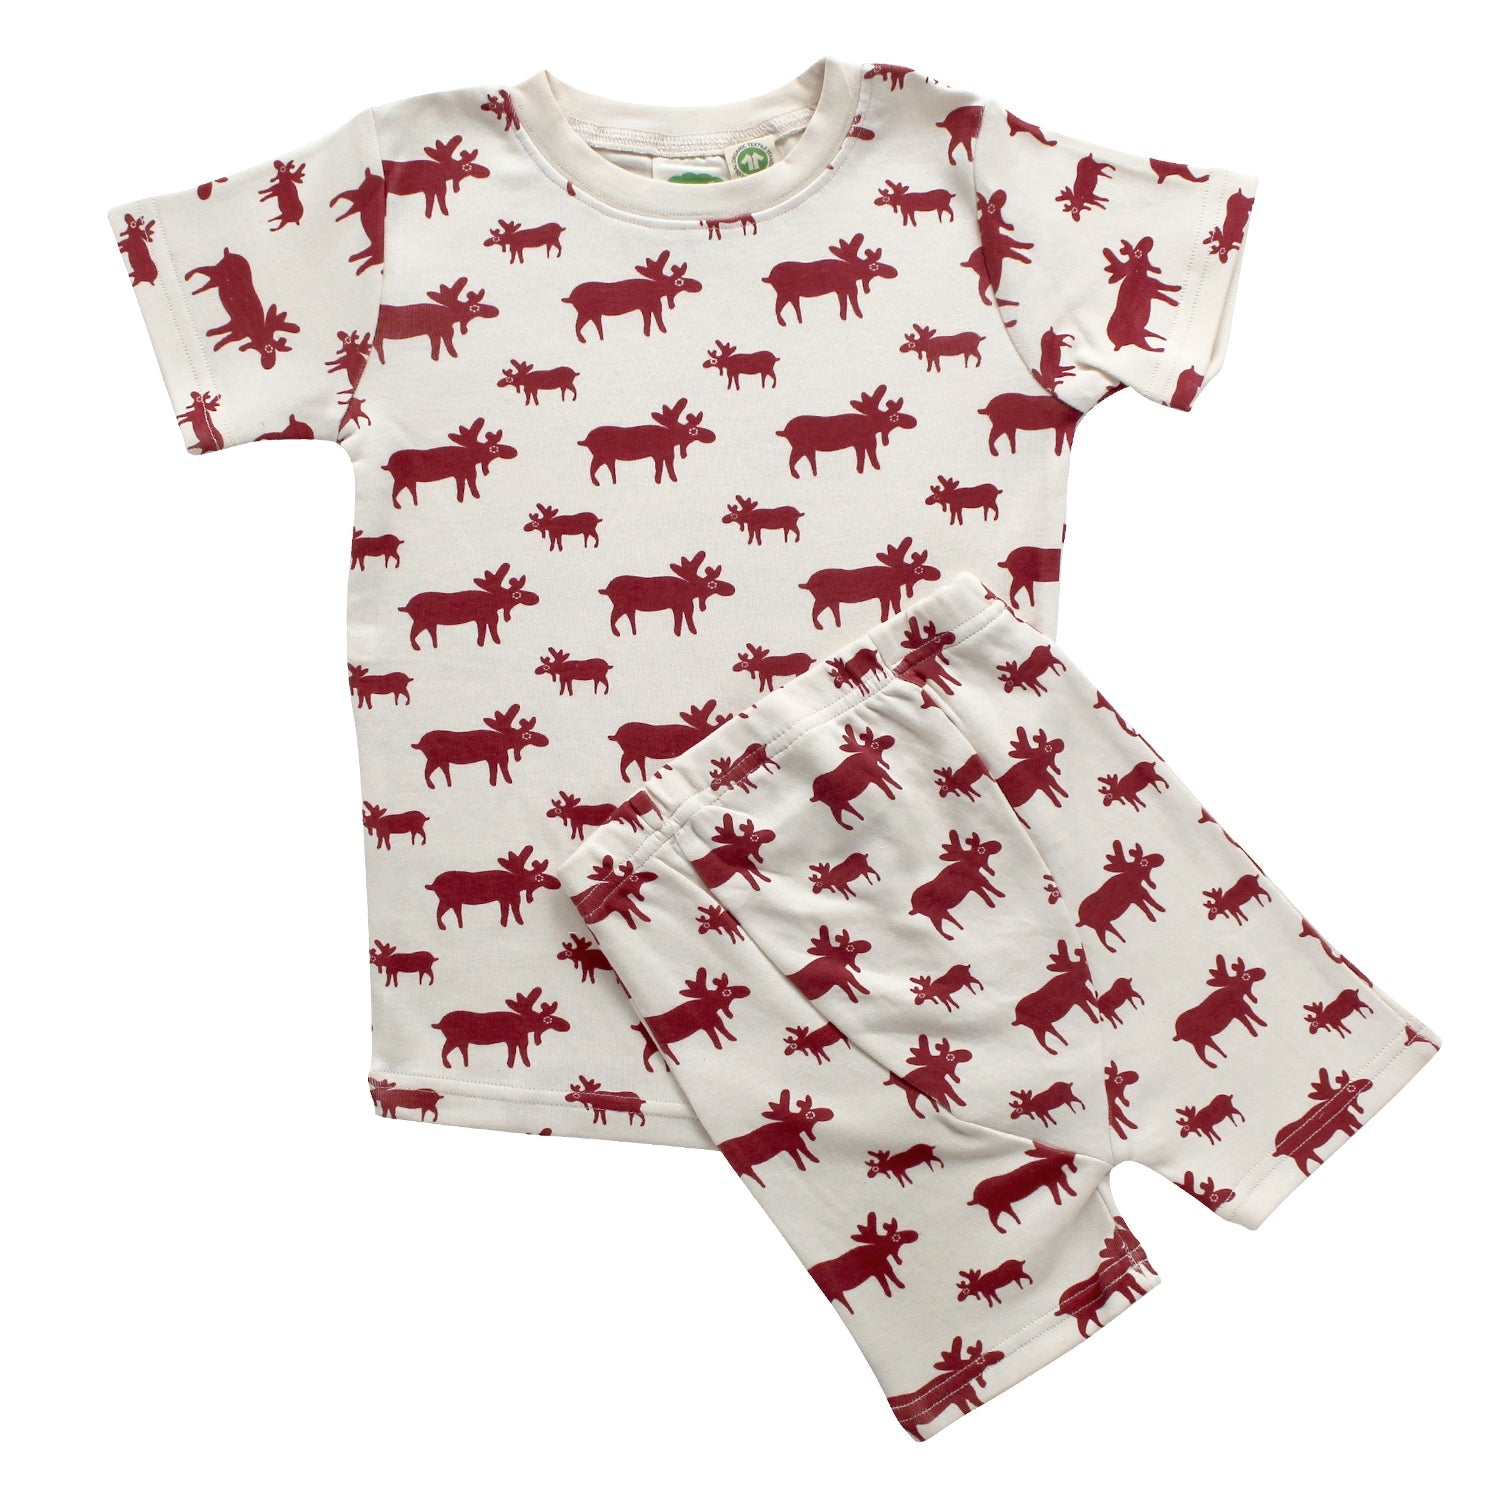 Yay! Organic clothing brand that made holiday pajamas for the